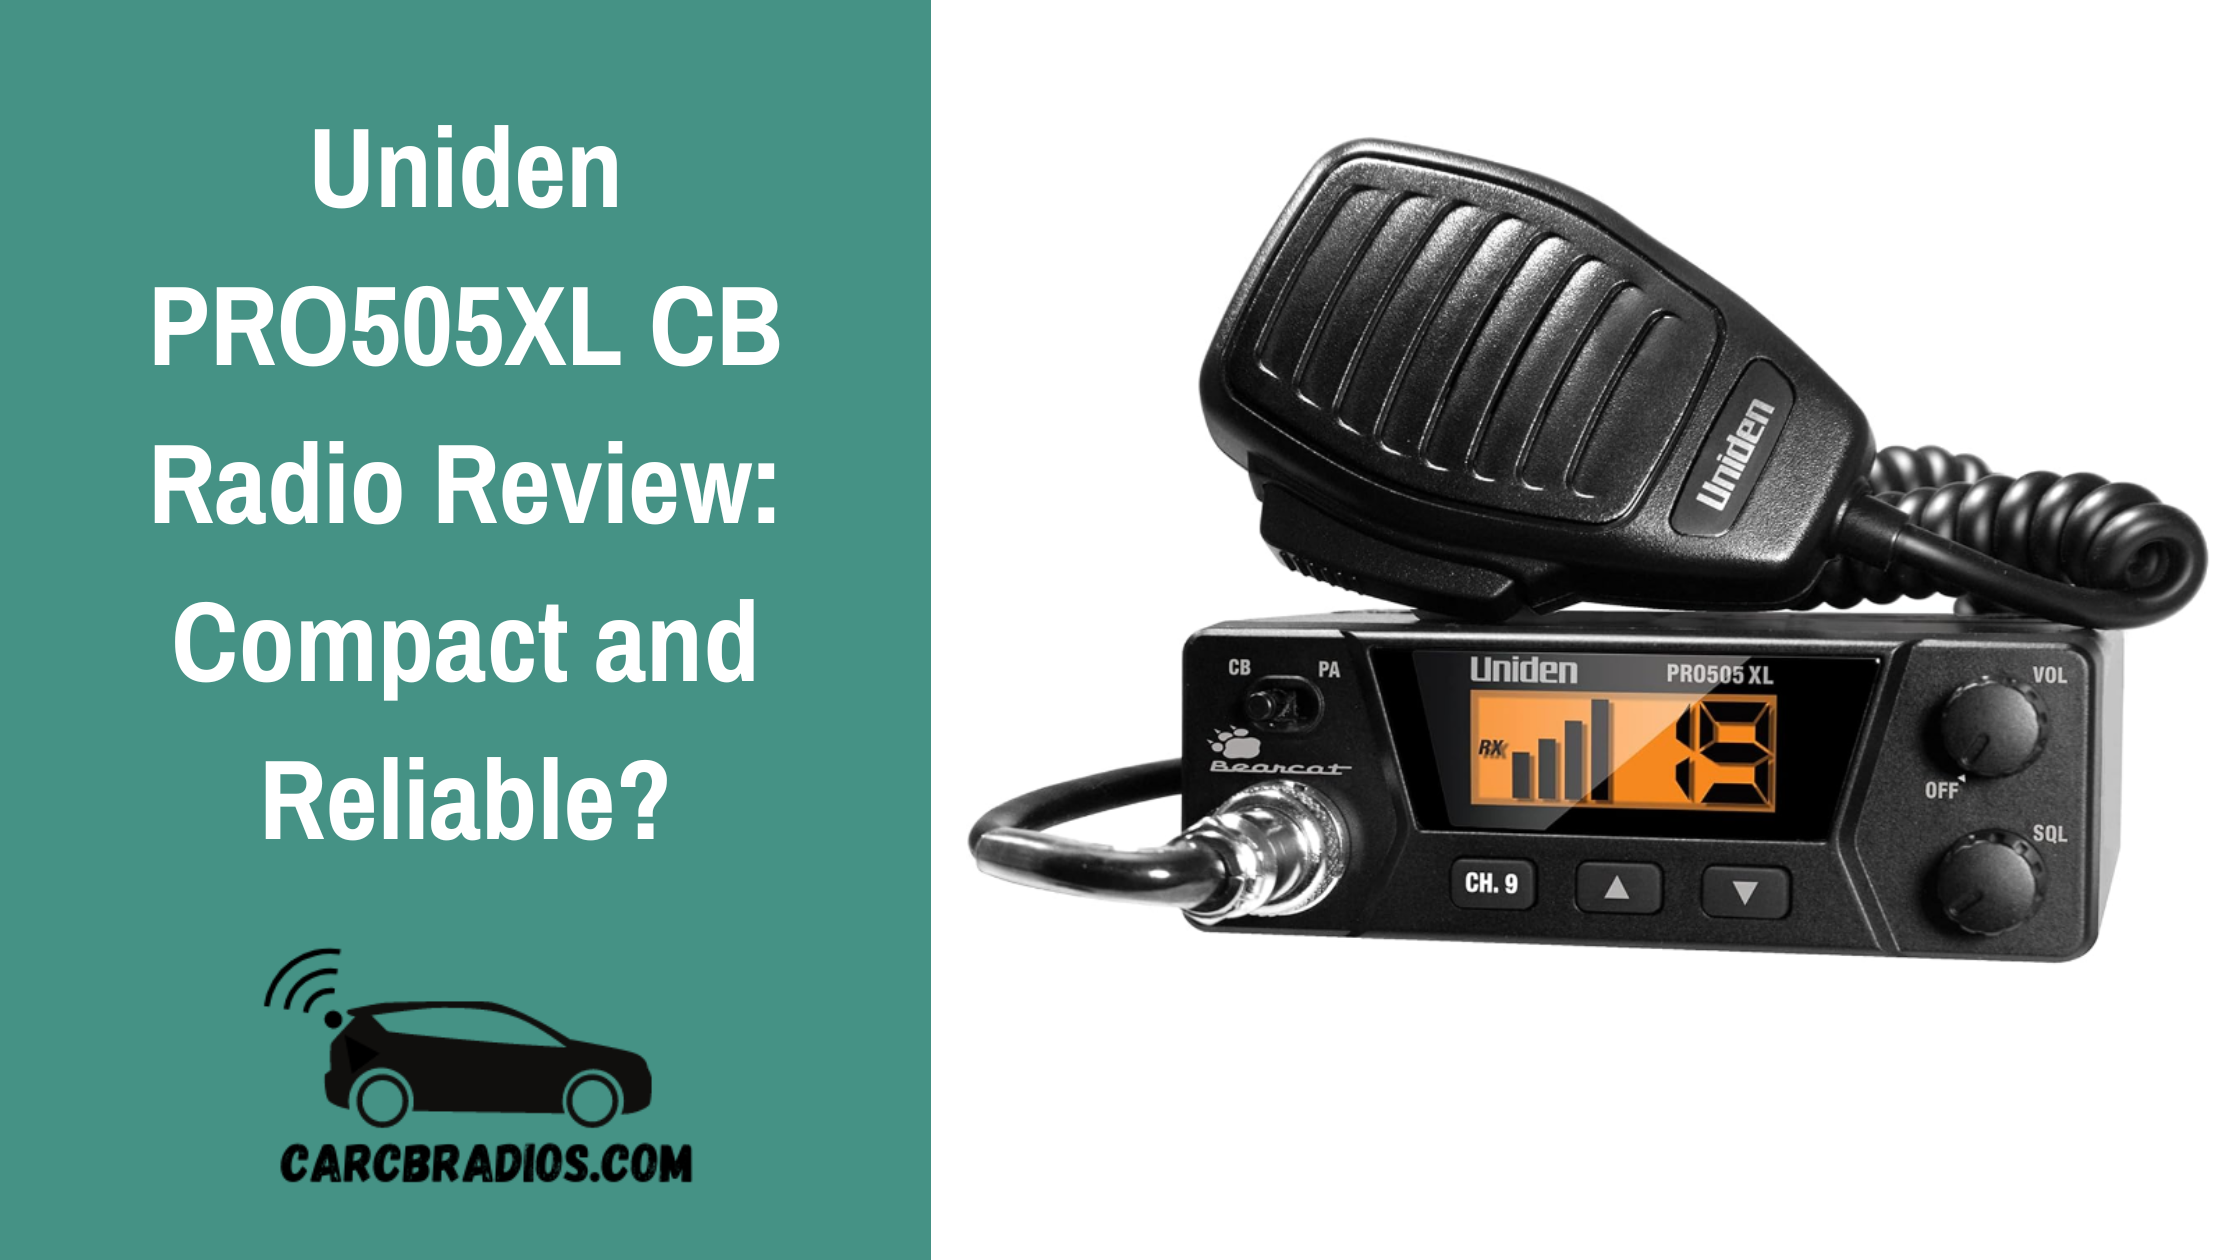 Overall, I would highly recommend the Uniden PRO505XL to anyone in need of an affordable and reliable CB radio. Its compact design and advanced features make it a great choice for both beginners and experienced users alike.